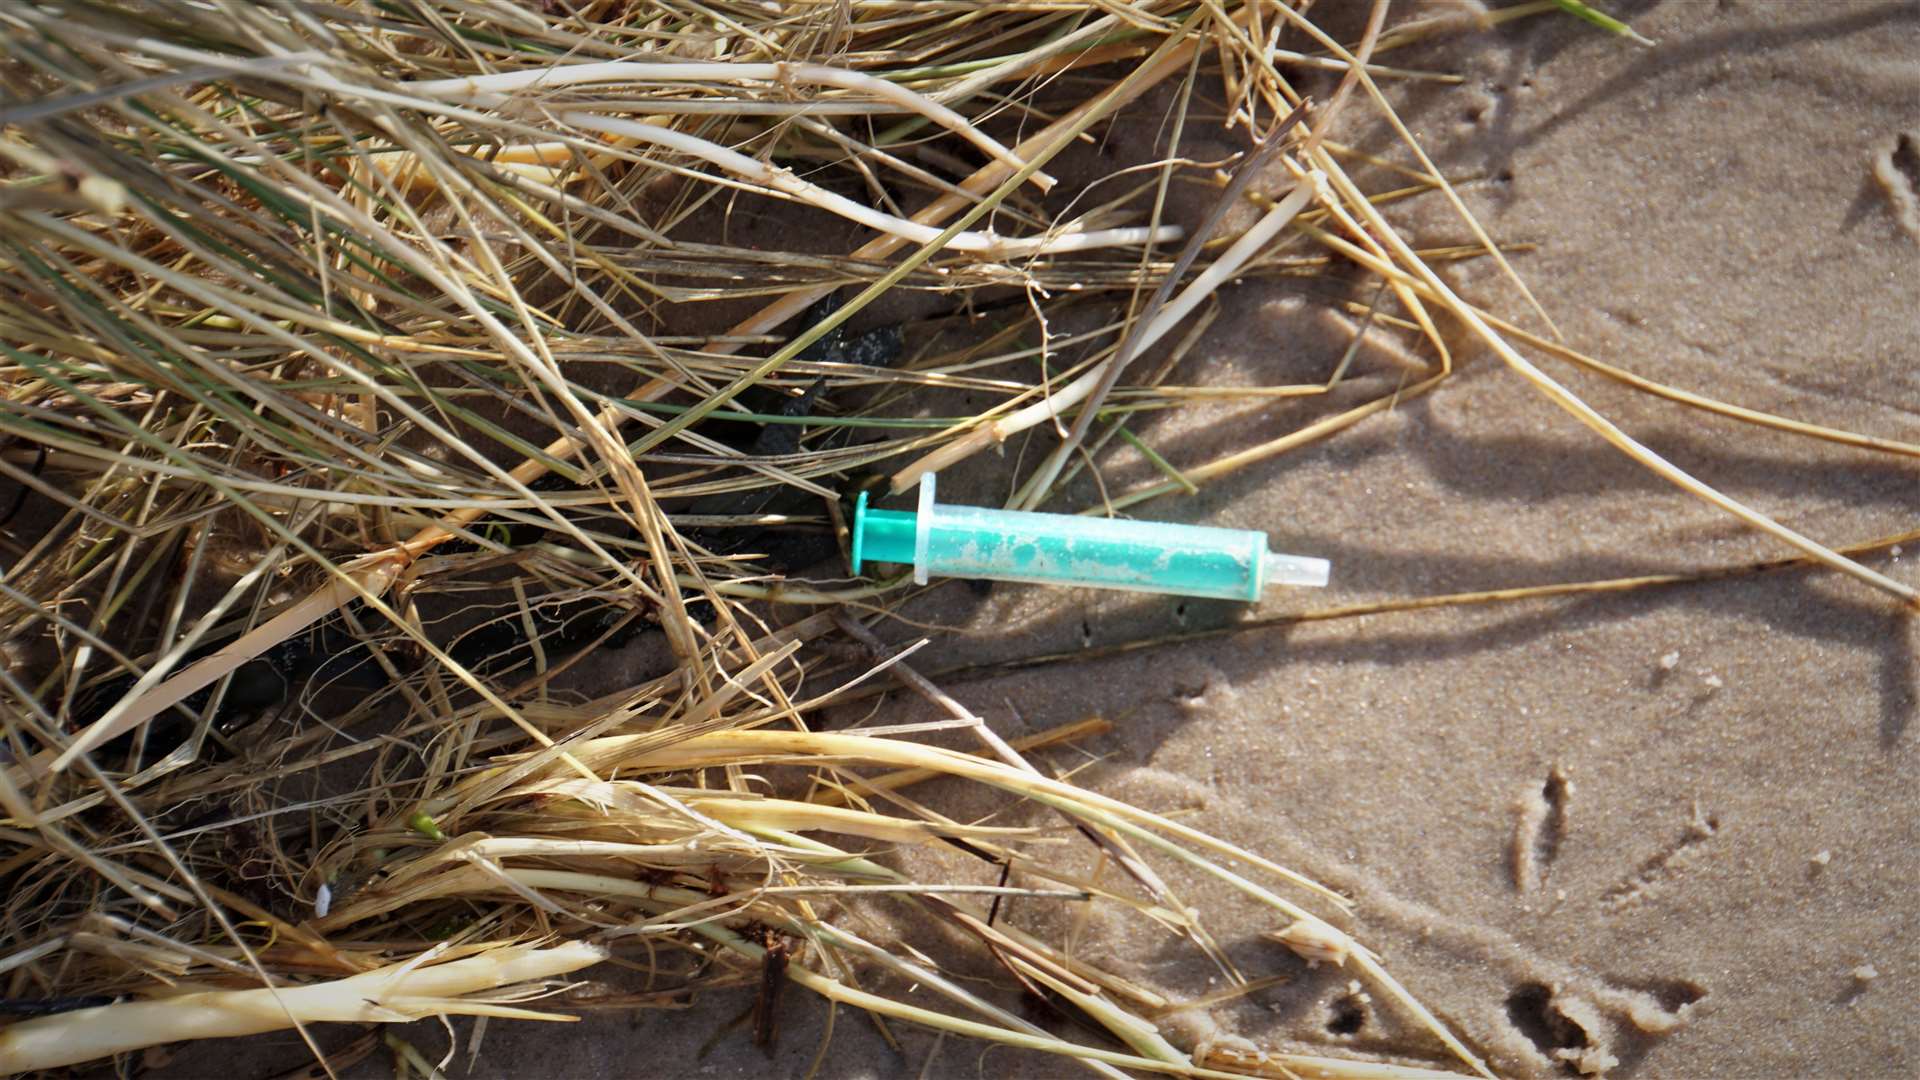 A plastic syringe that found its way on to the beach. Picture: DGS